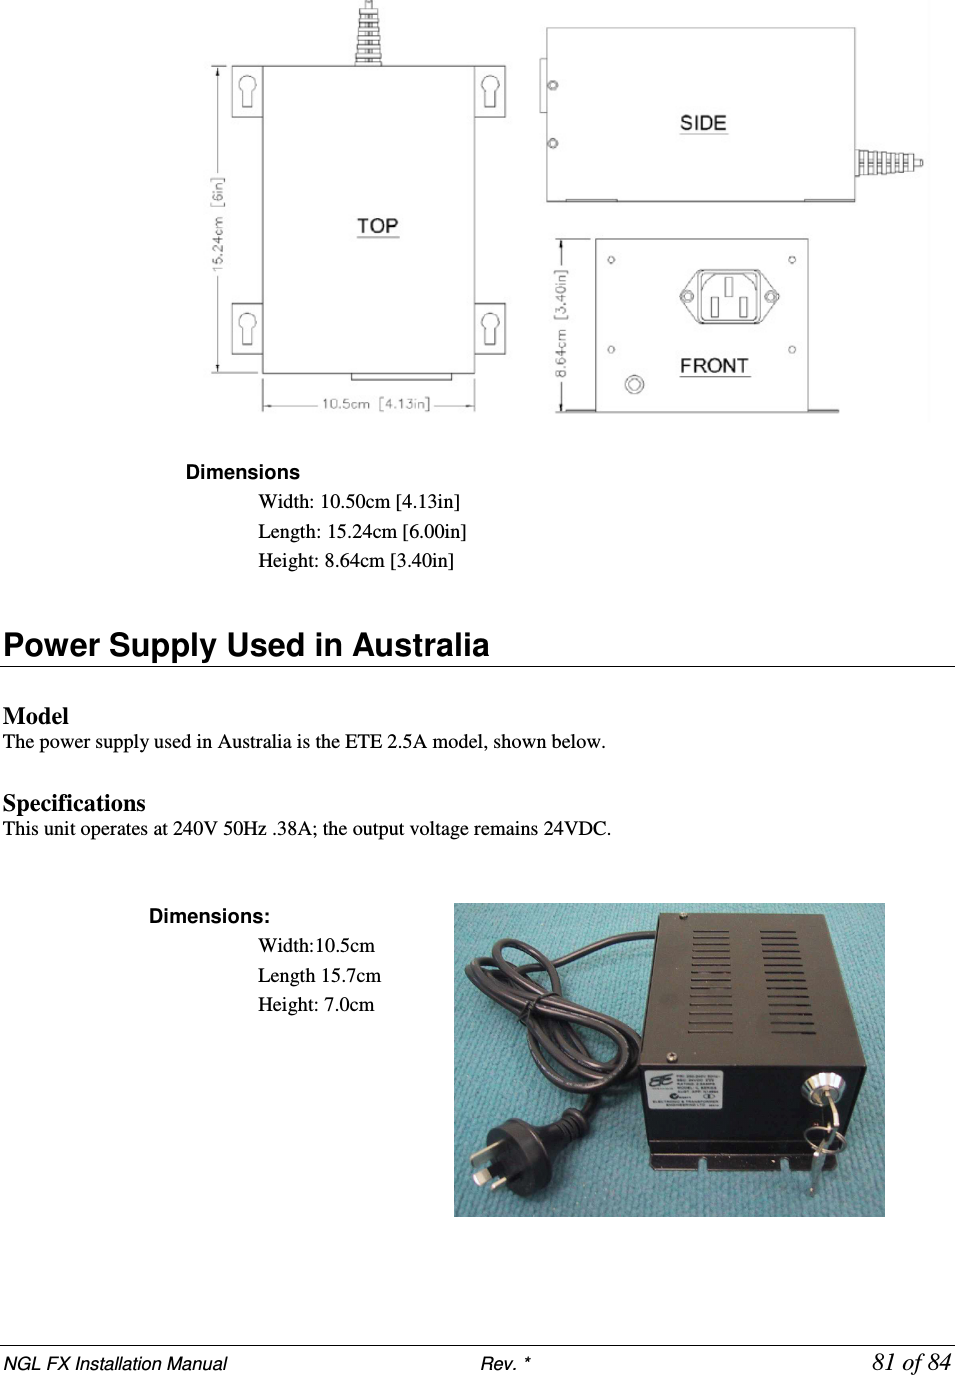 NGL FX Installation Manual                           Rev. *            81 of 84   Dimensions  Width: 10.50cm [4.13in]  Length: 15.24cm [6.00in]  Height: 8.64cm [3.40in]  Power Supply Used in Australia   Model The power supply used in Australia is the ETE 2.5A model, shown below.   Specifications This unit operates at 240V 50Hz .38A; the output voltage remains 24VDC.    Dimensions:  Width:10.5cm  Length 15.7cm Height: 7.0cm    